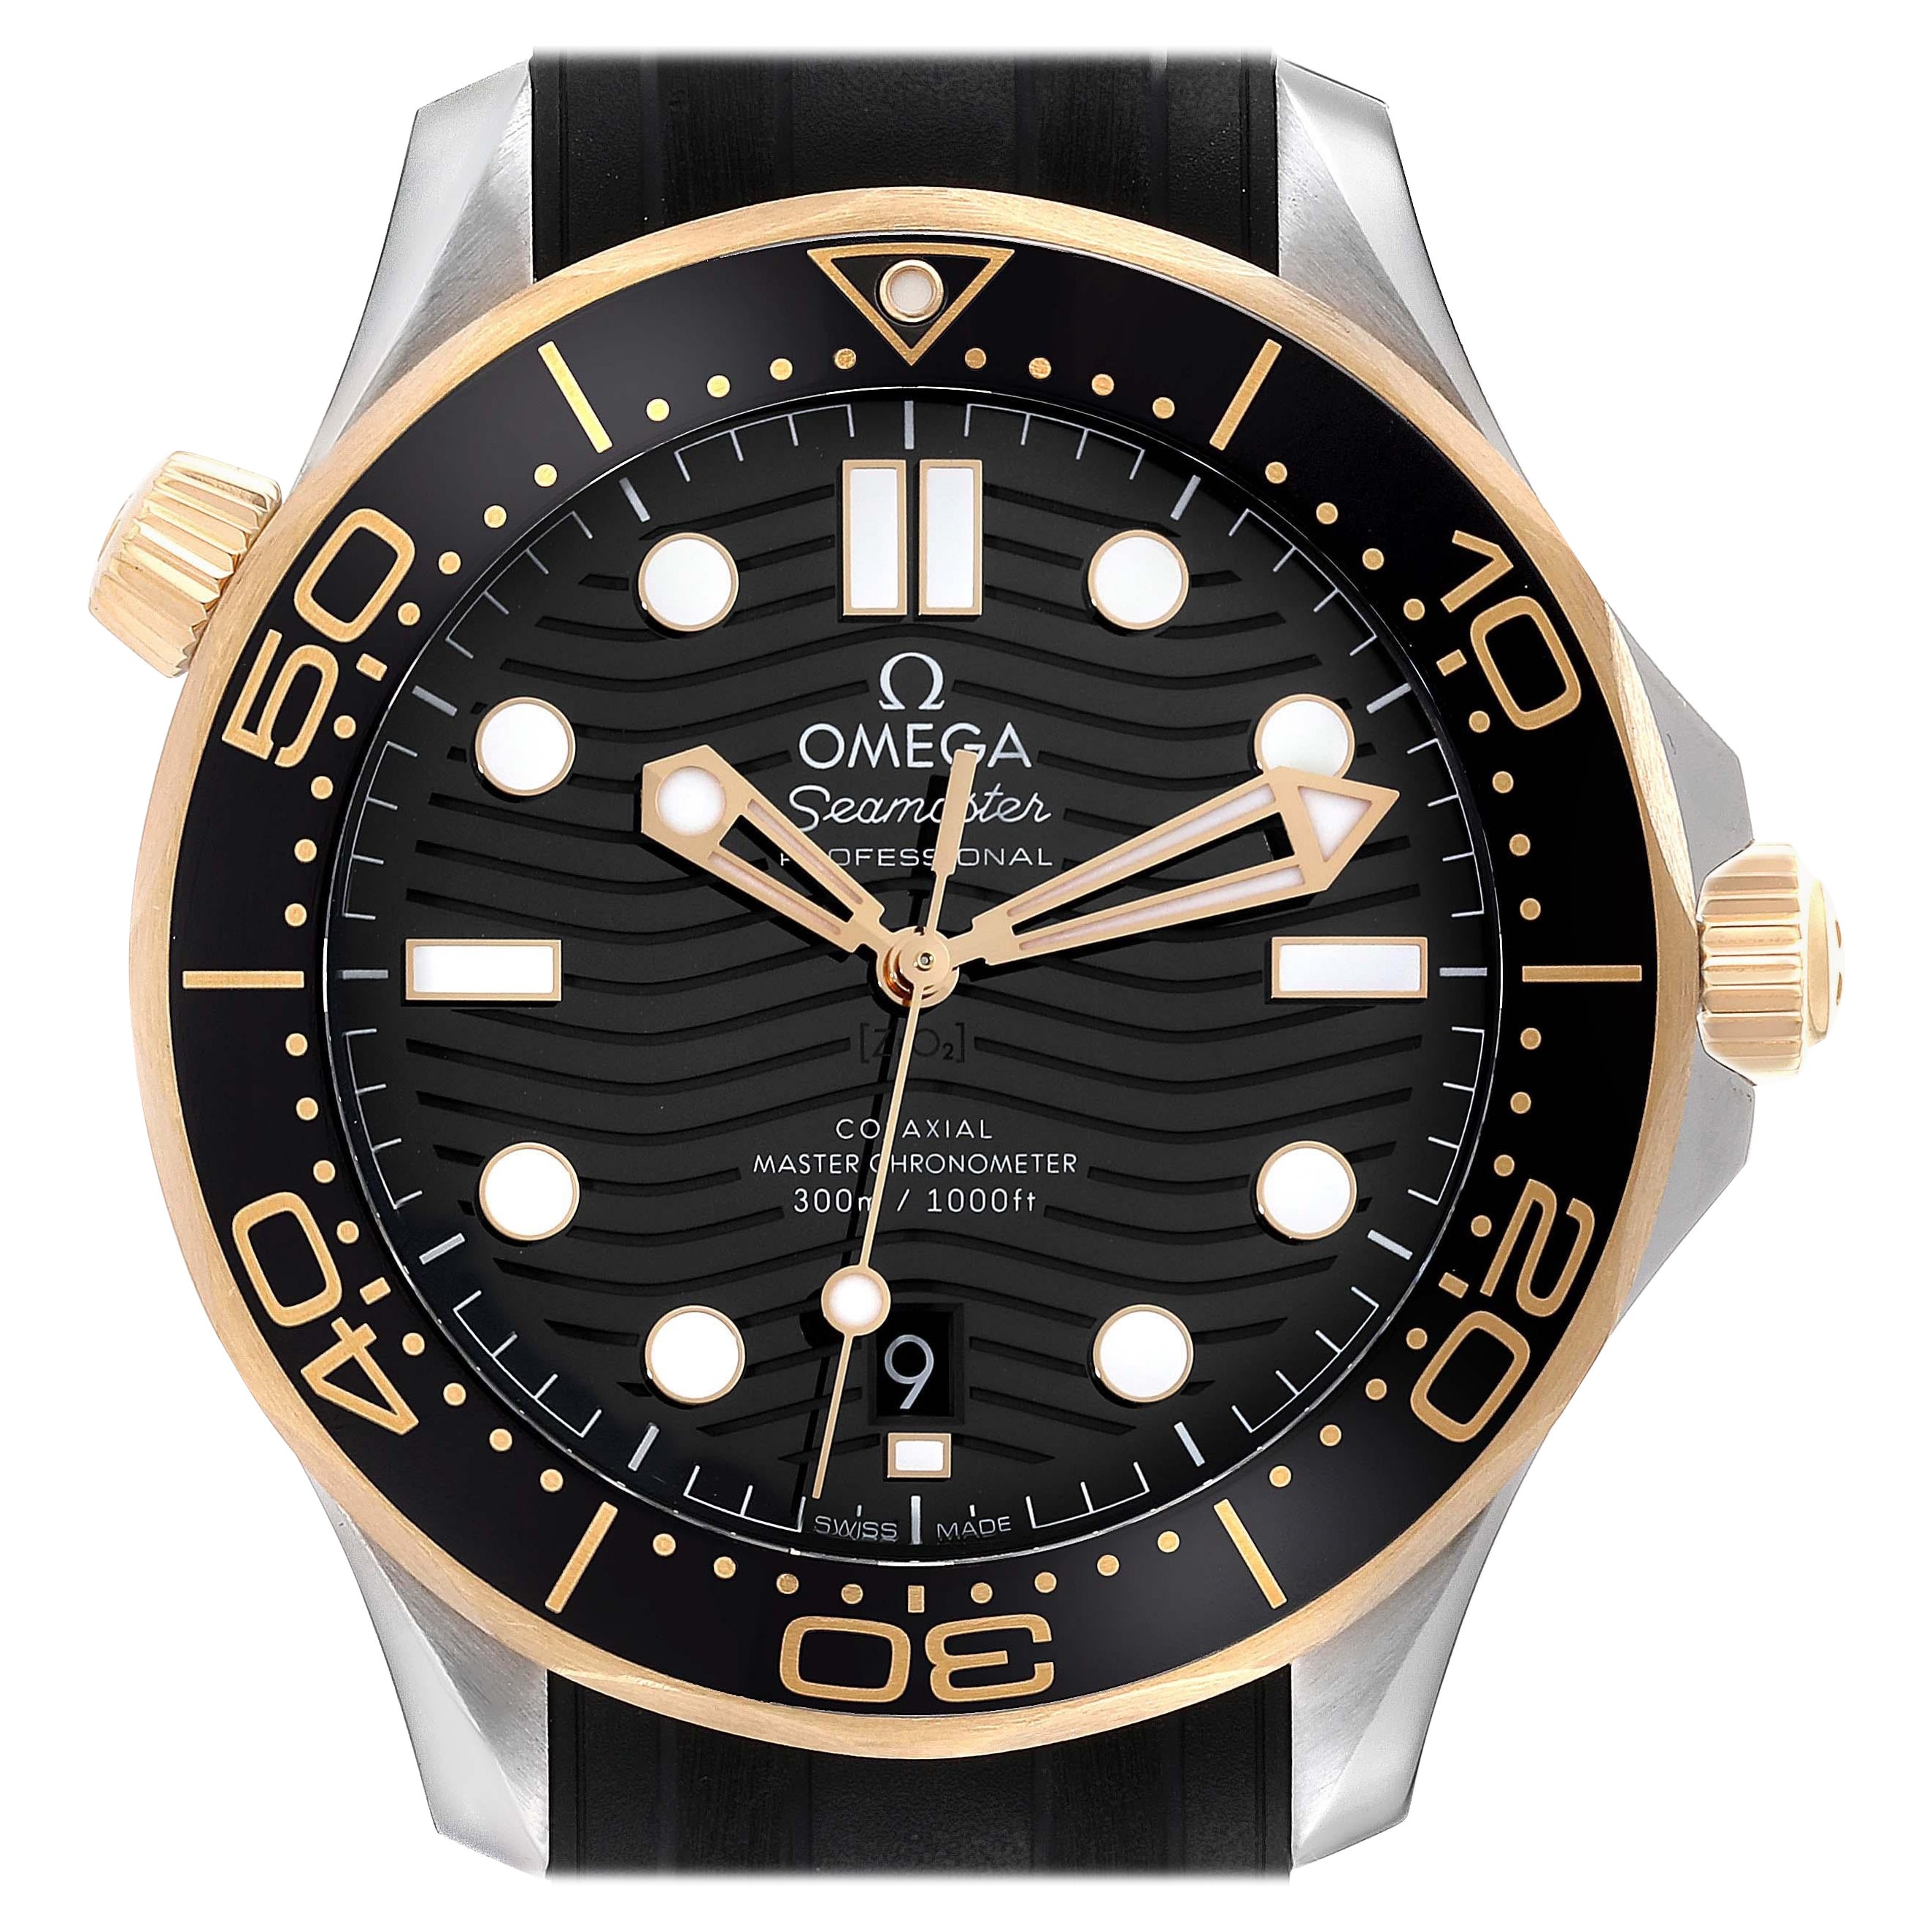 Omega Seamaster Diver Steel Yellow Gold Mens Watch 210.22.42.20.01.001 Card For Sale